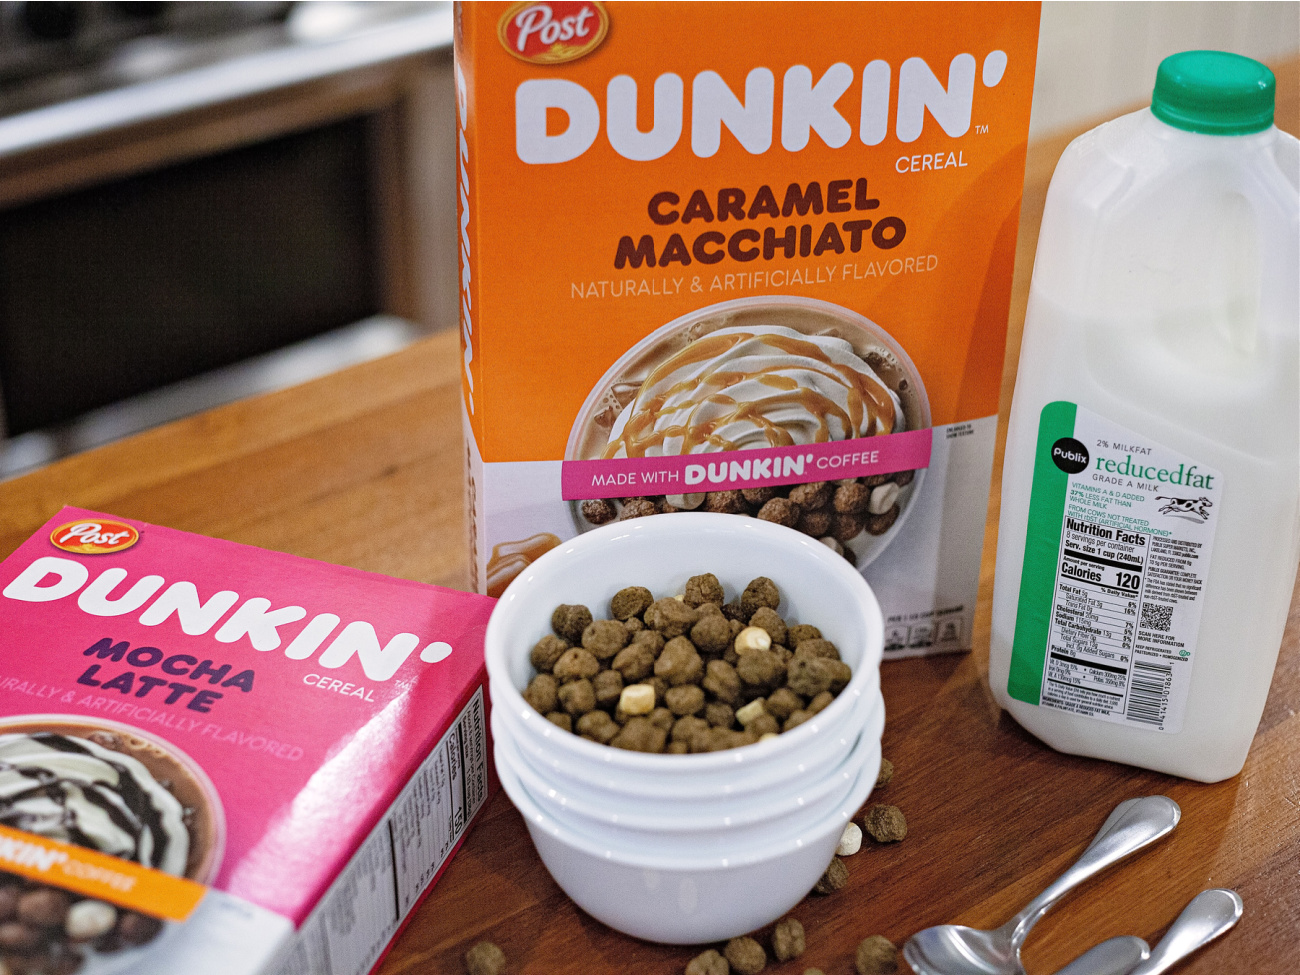 Don't Miss The Sale On Post Dunkin’ Cereal - Buy One, Get One FREE At Publix! on I Heart Publix 1